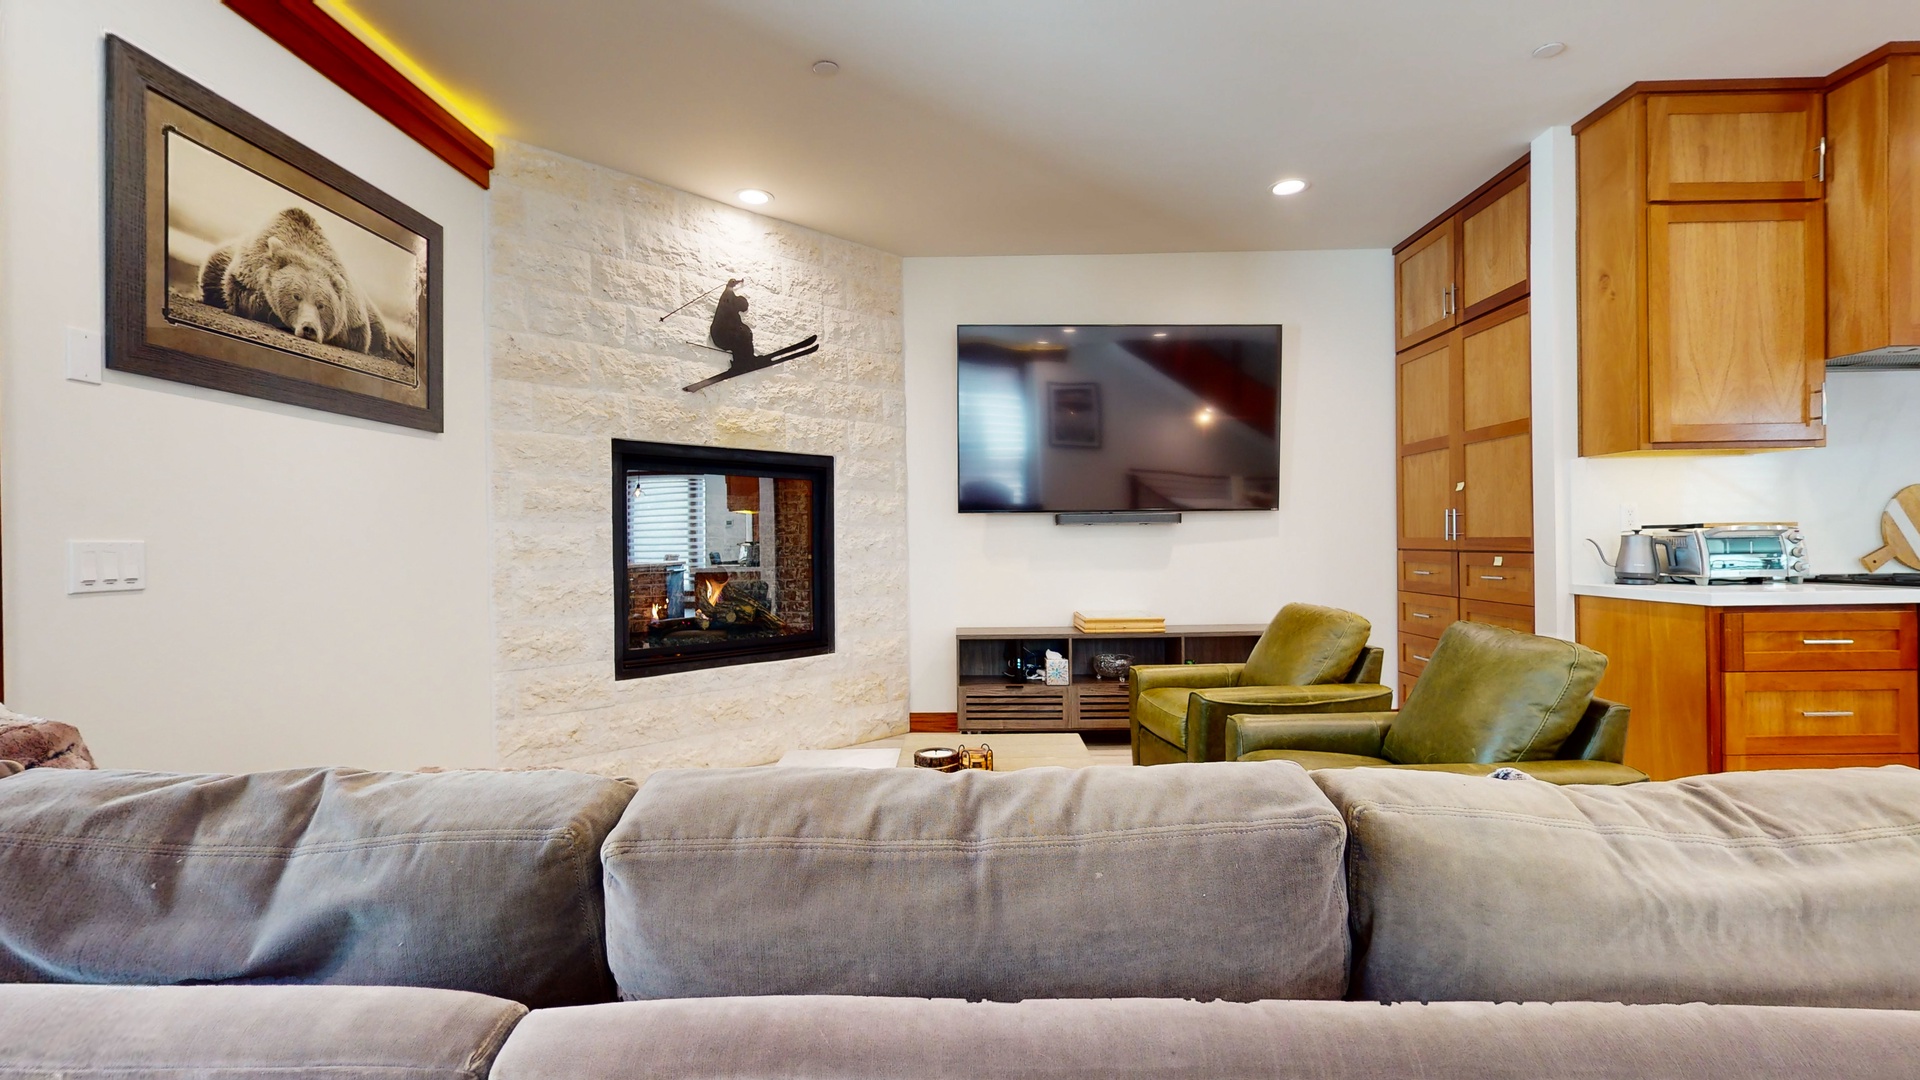 Curl up for a movie or enjoy a warming fire in the living room’s gas fireplace